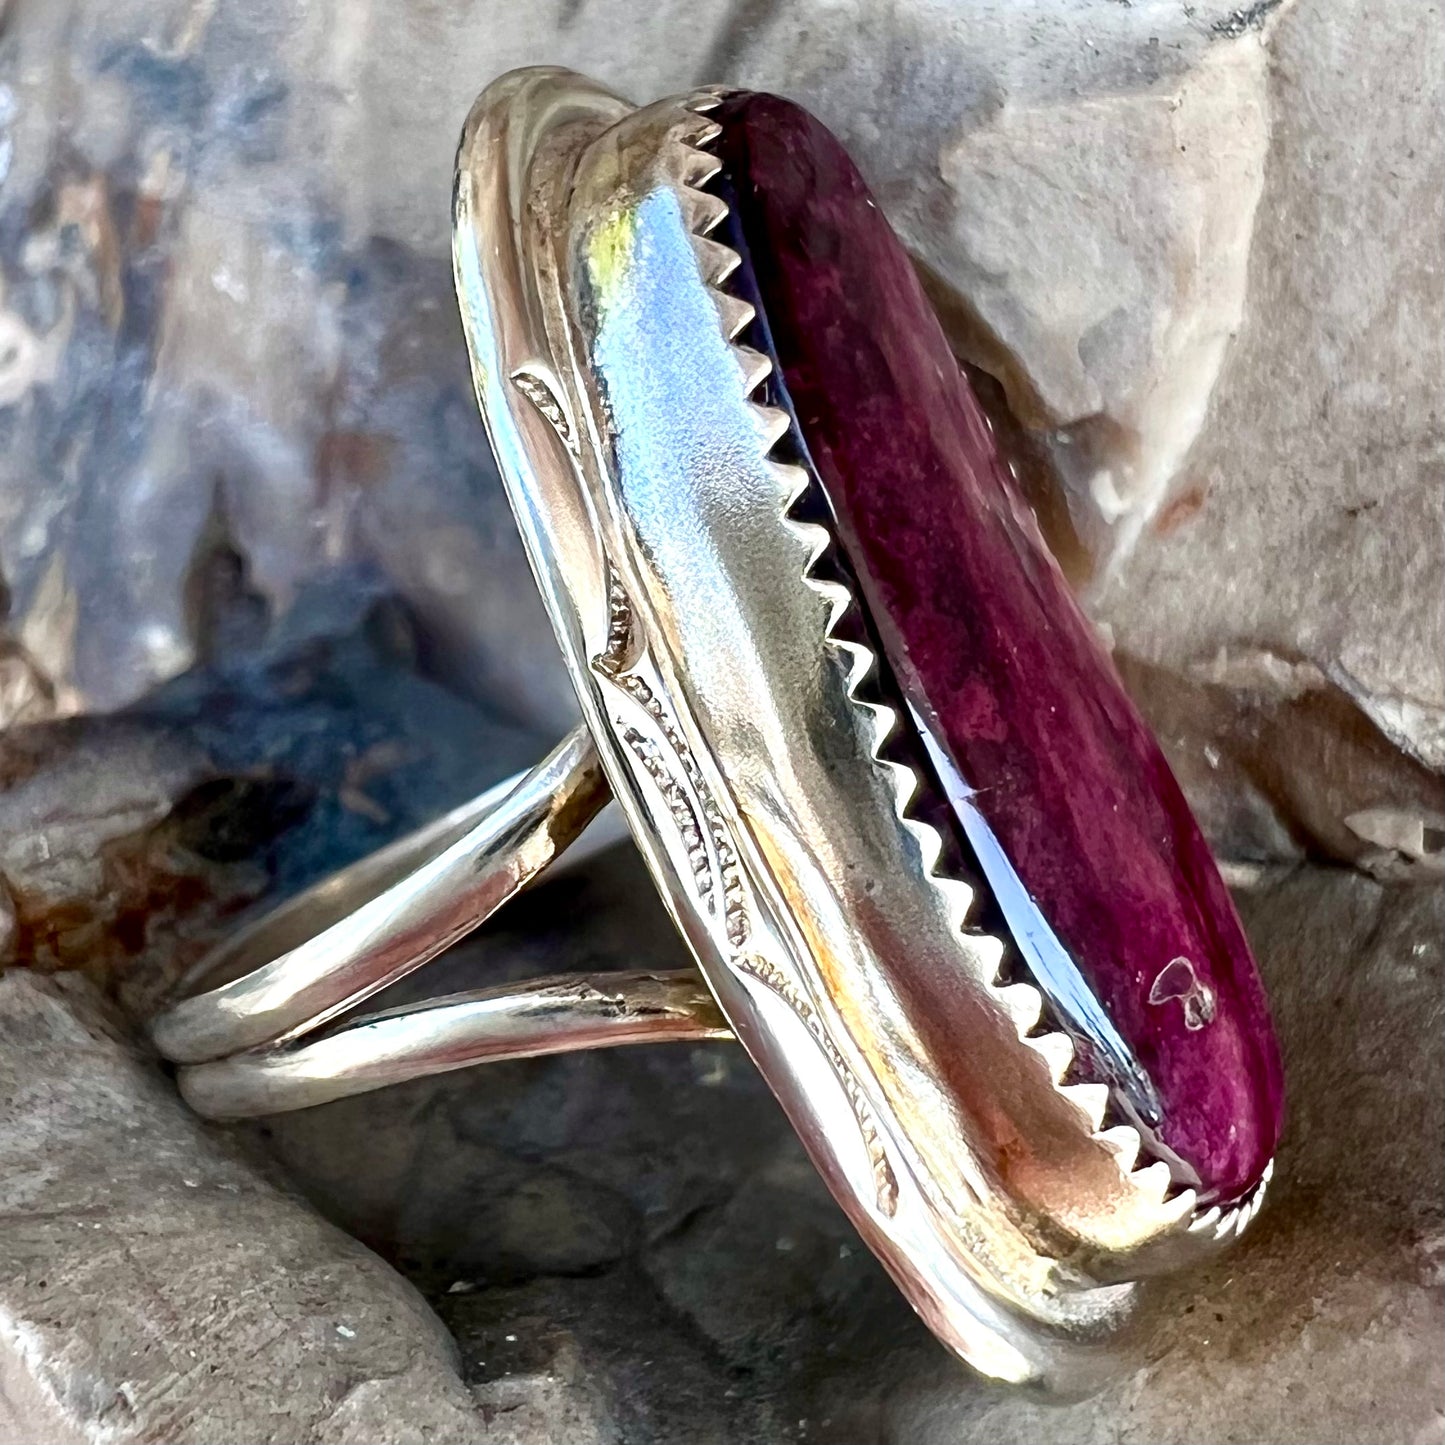 A sterling silver Navajo style ring set with a purple spiny oyster shell.